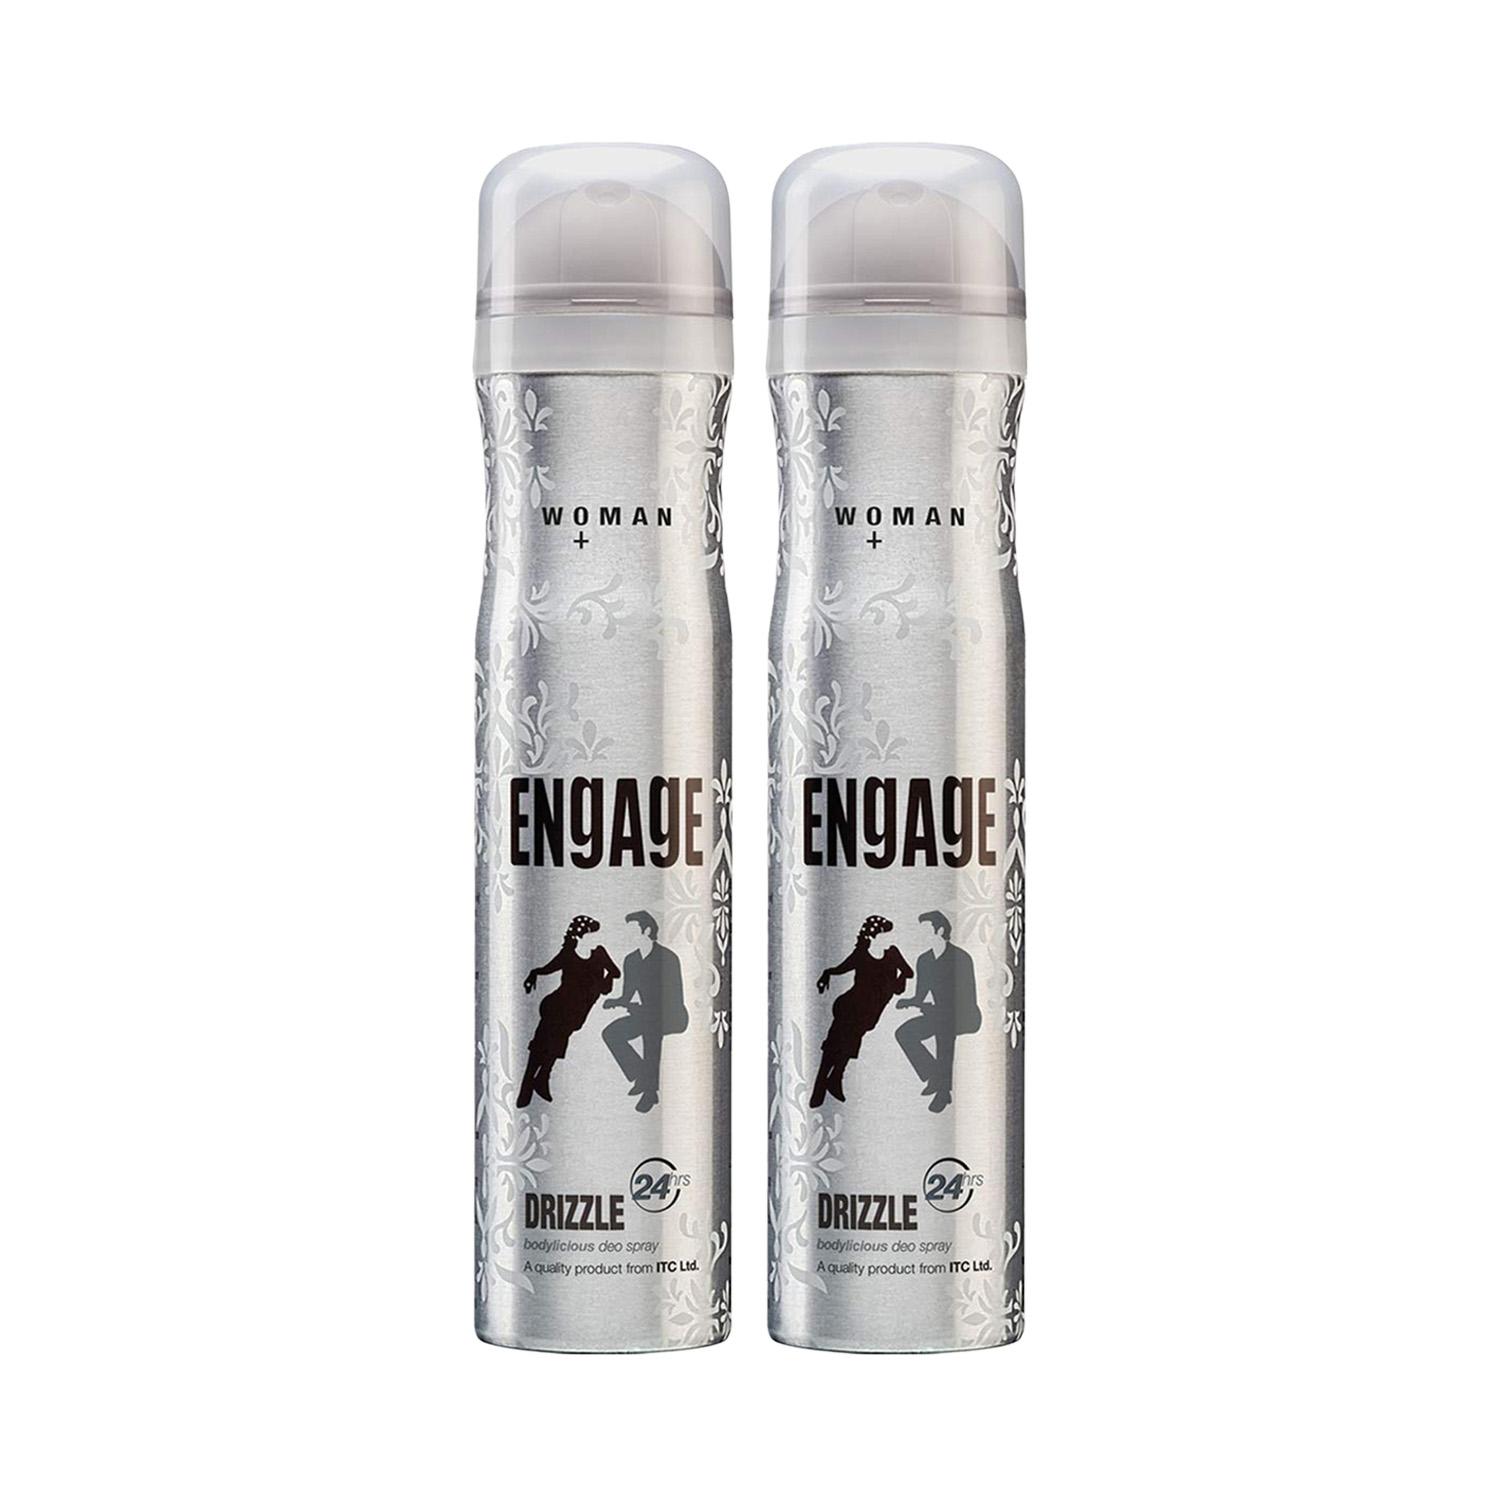 Engage | Engage Drizzle Deodorant Spray For Women (150 ml) (Pack of 2) Combo